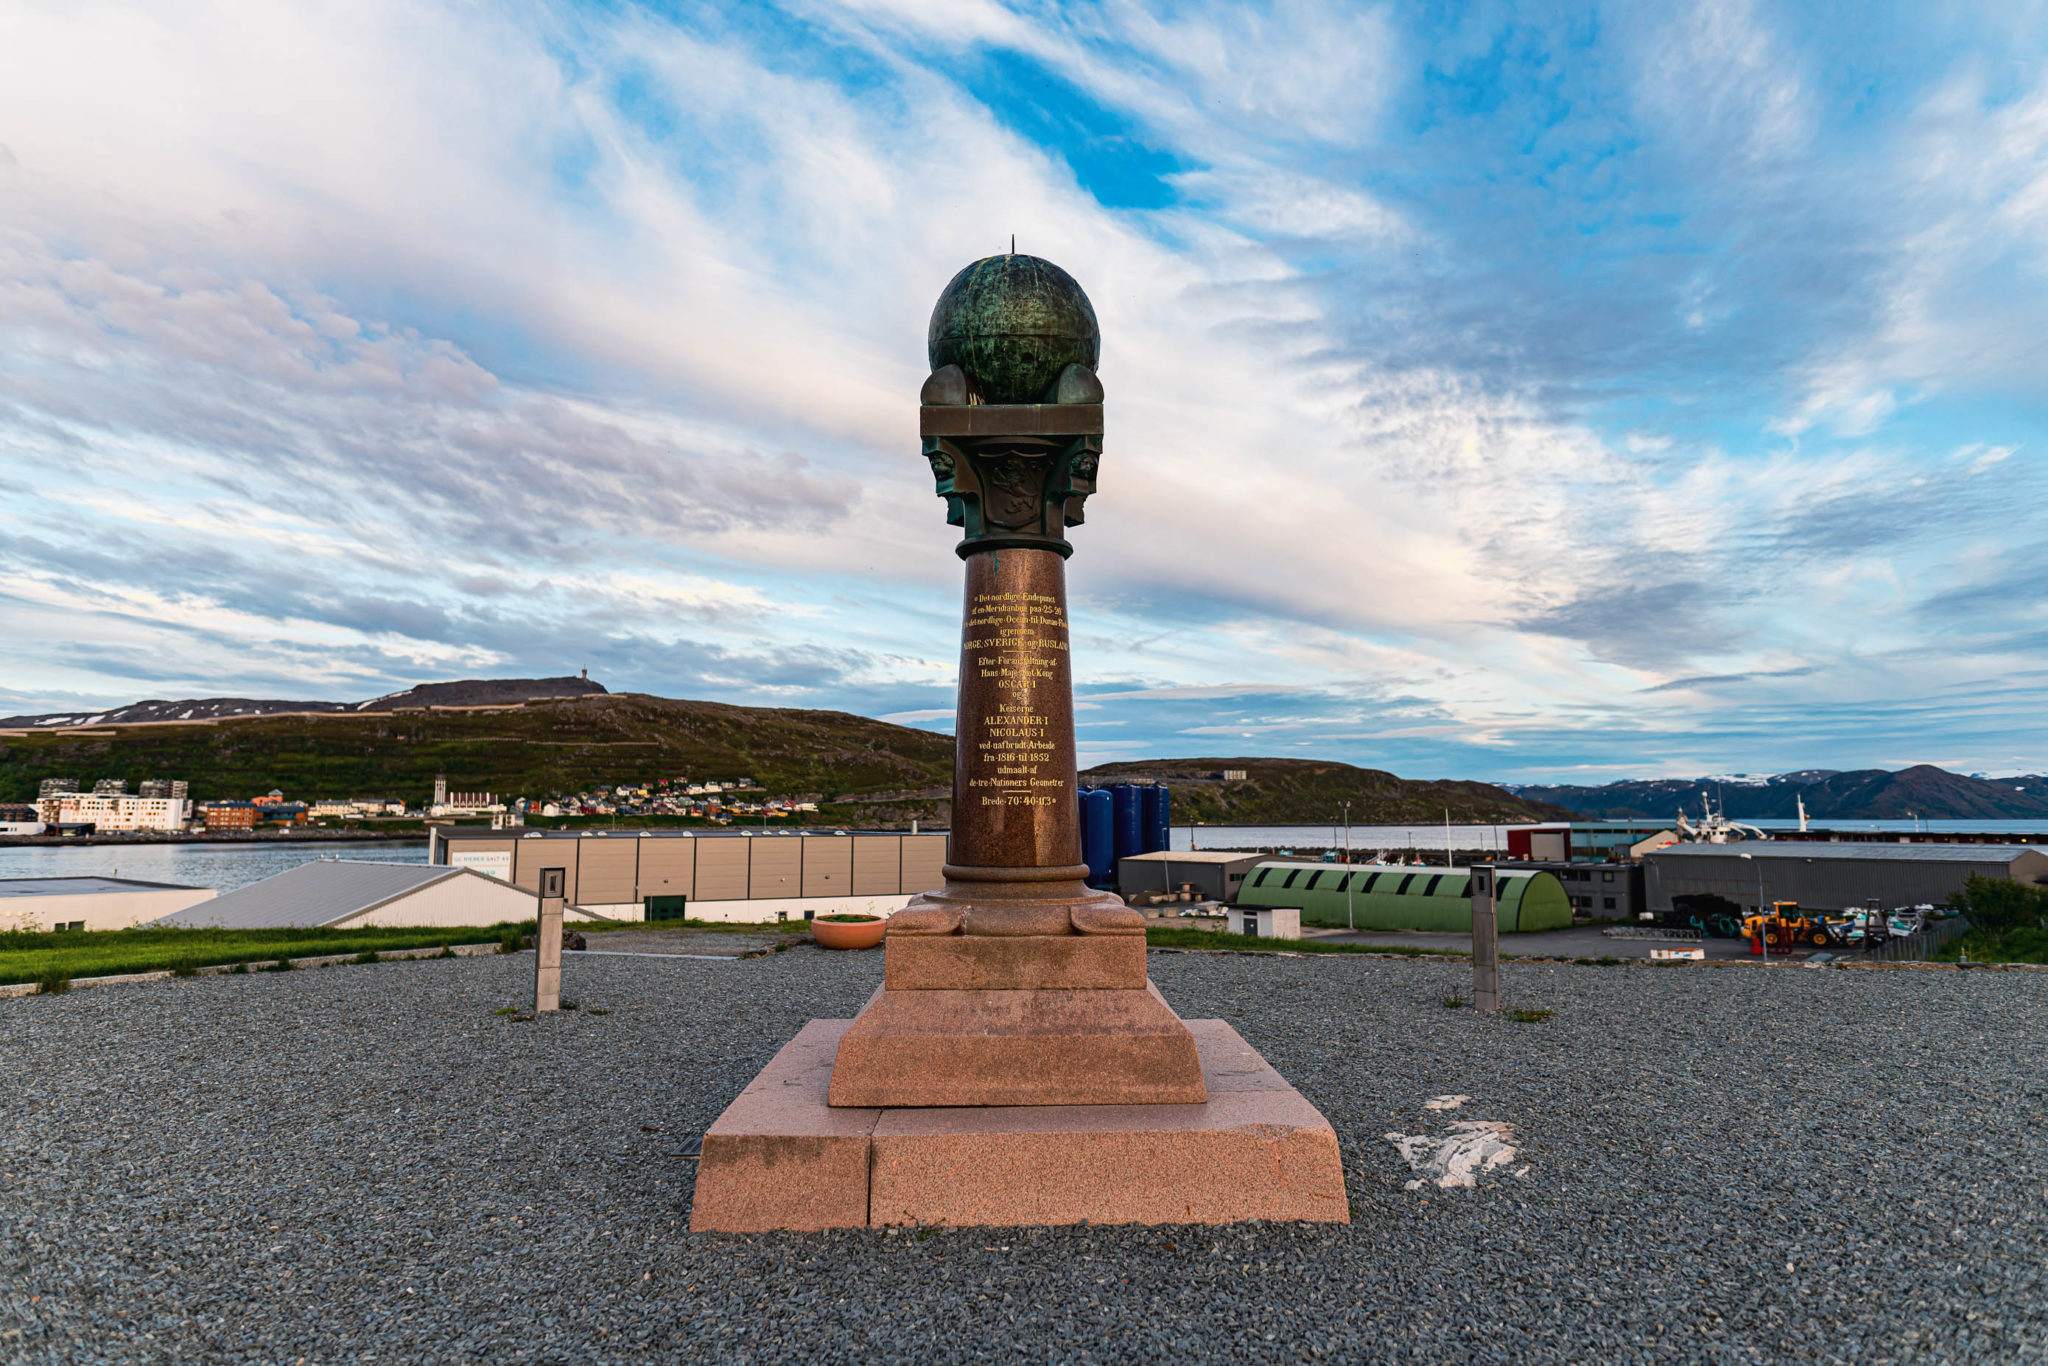 The Meridian column at Fugleneset Point in Hammerfest, in memory of the project of measuring the exact size and shape of the Planet © Marte Nyvoll